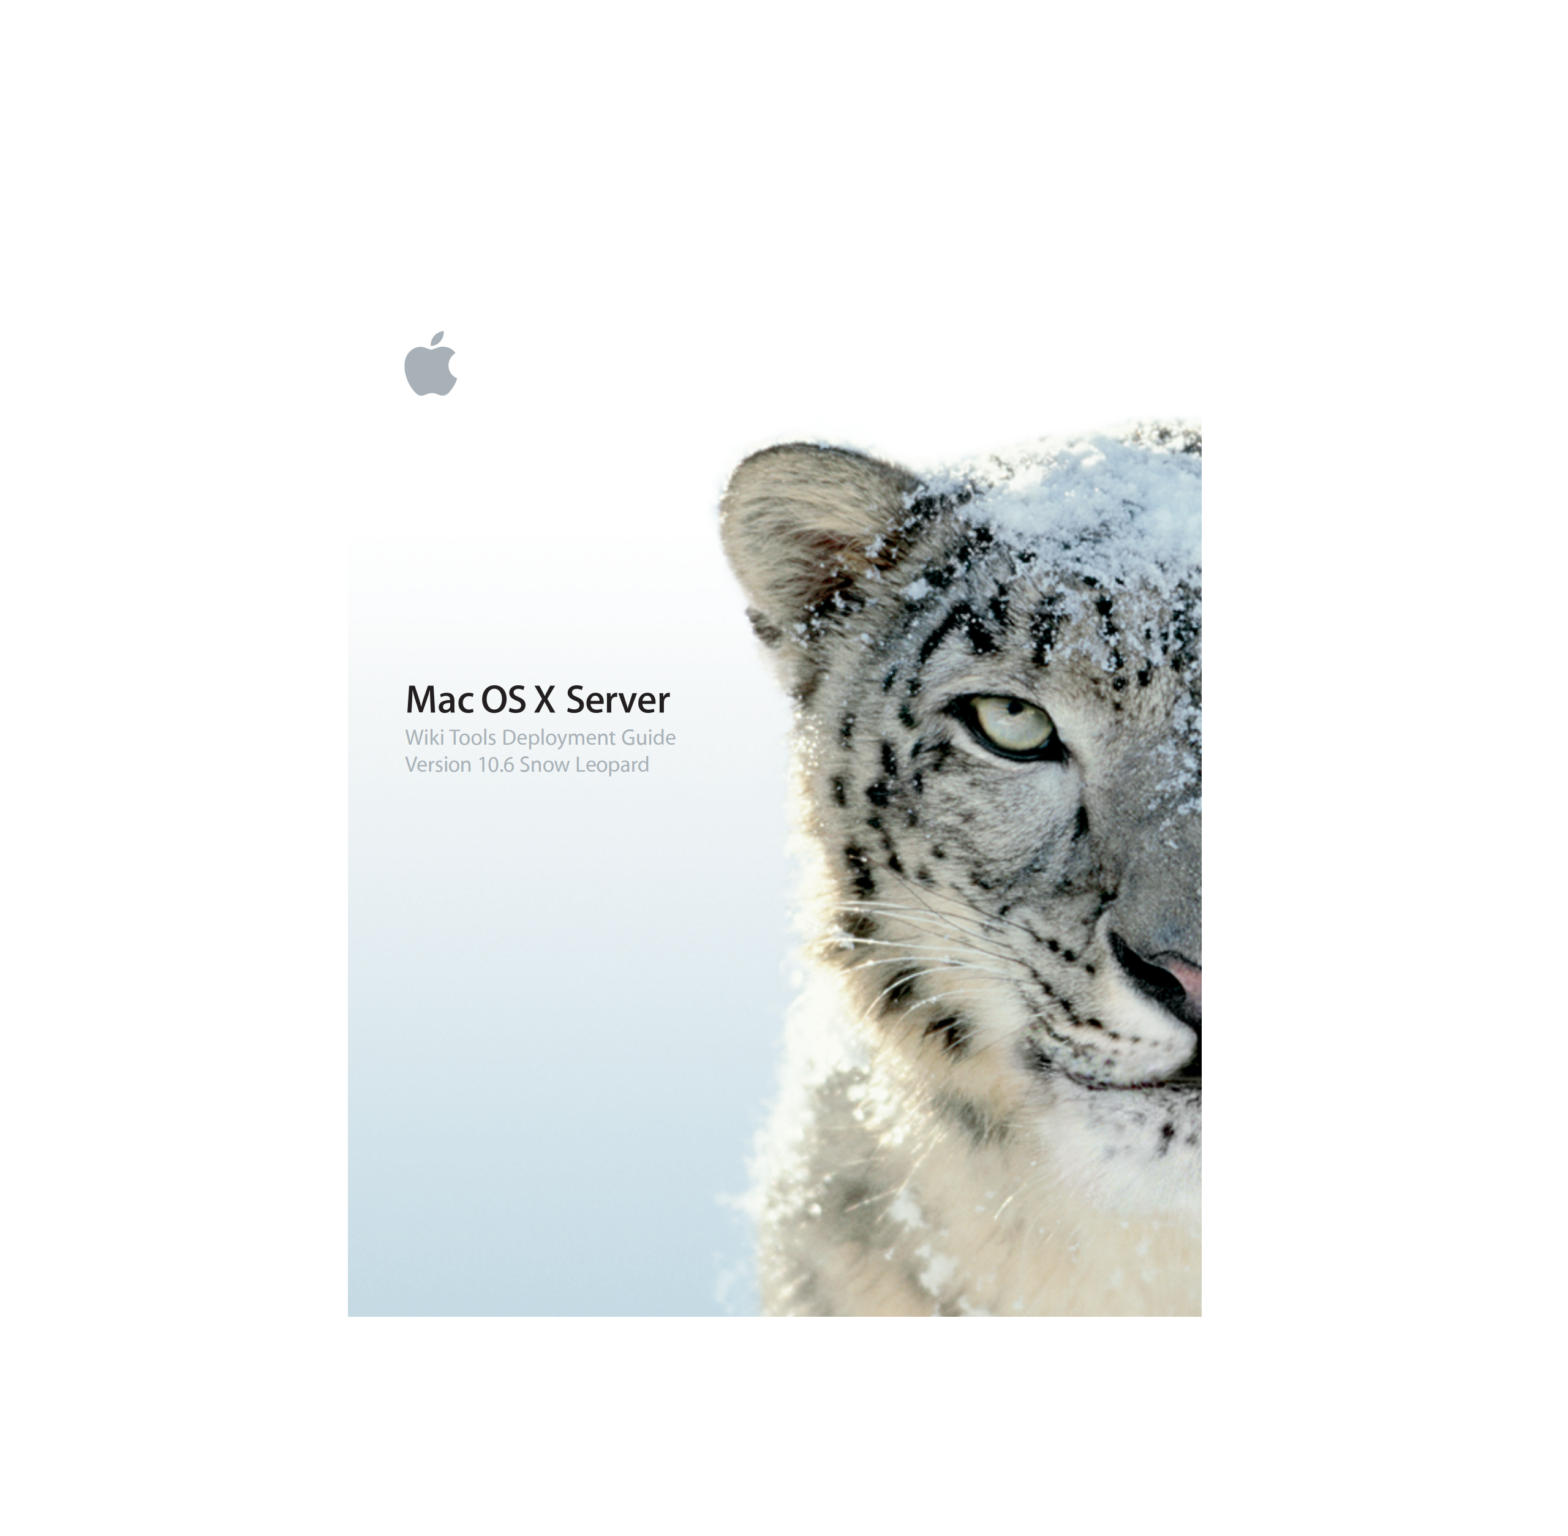 Apple Mac OS X Server Wiki Tools Deployment Guide Version 10.6 Snow Leopard